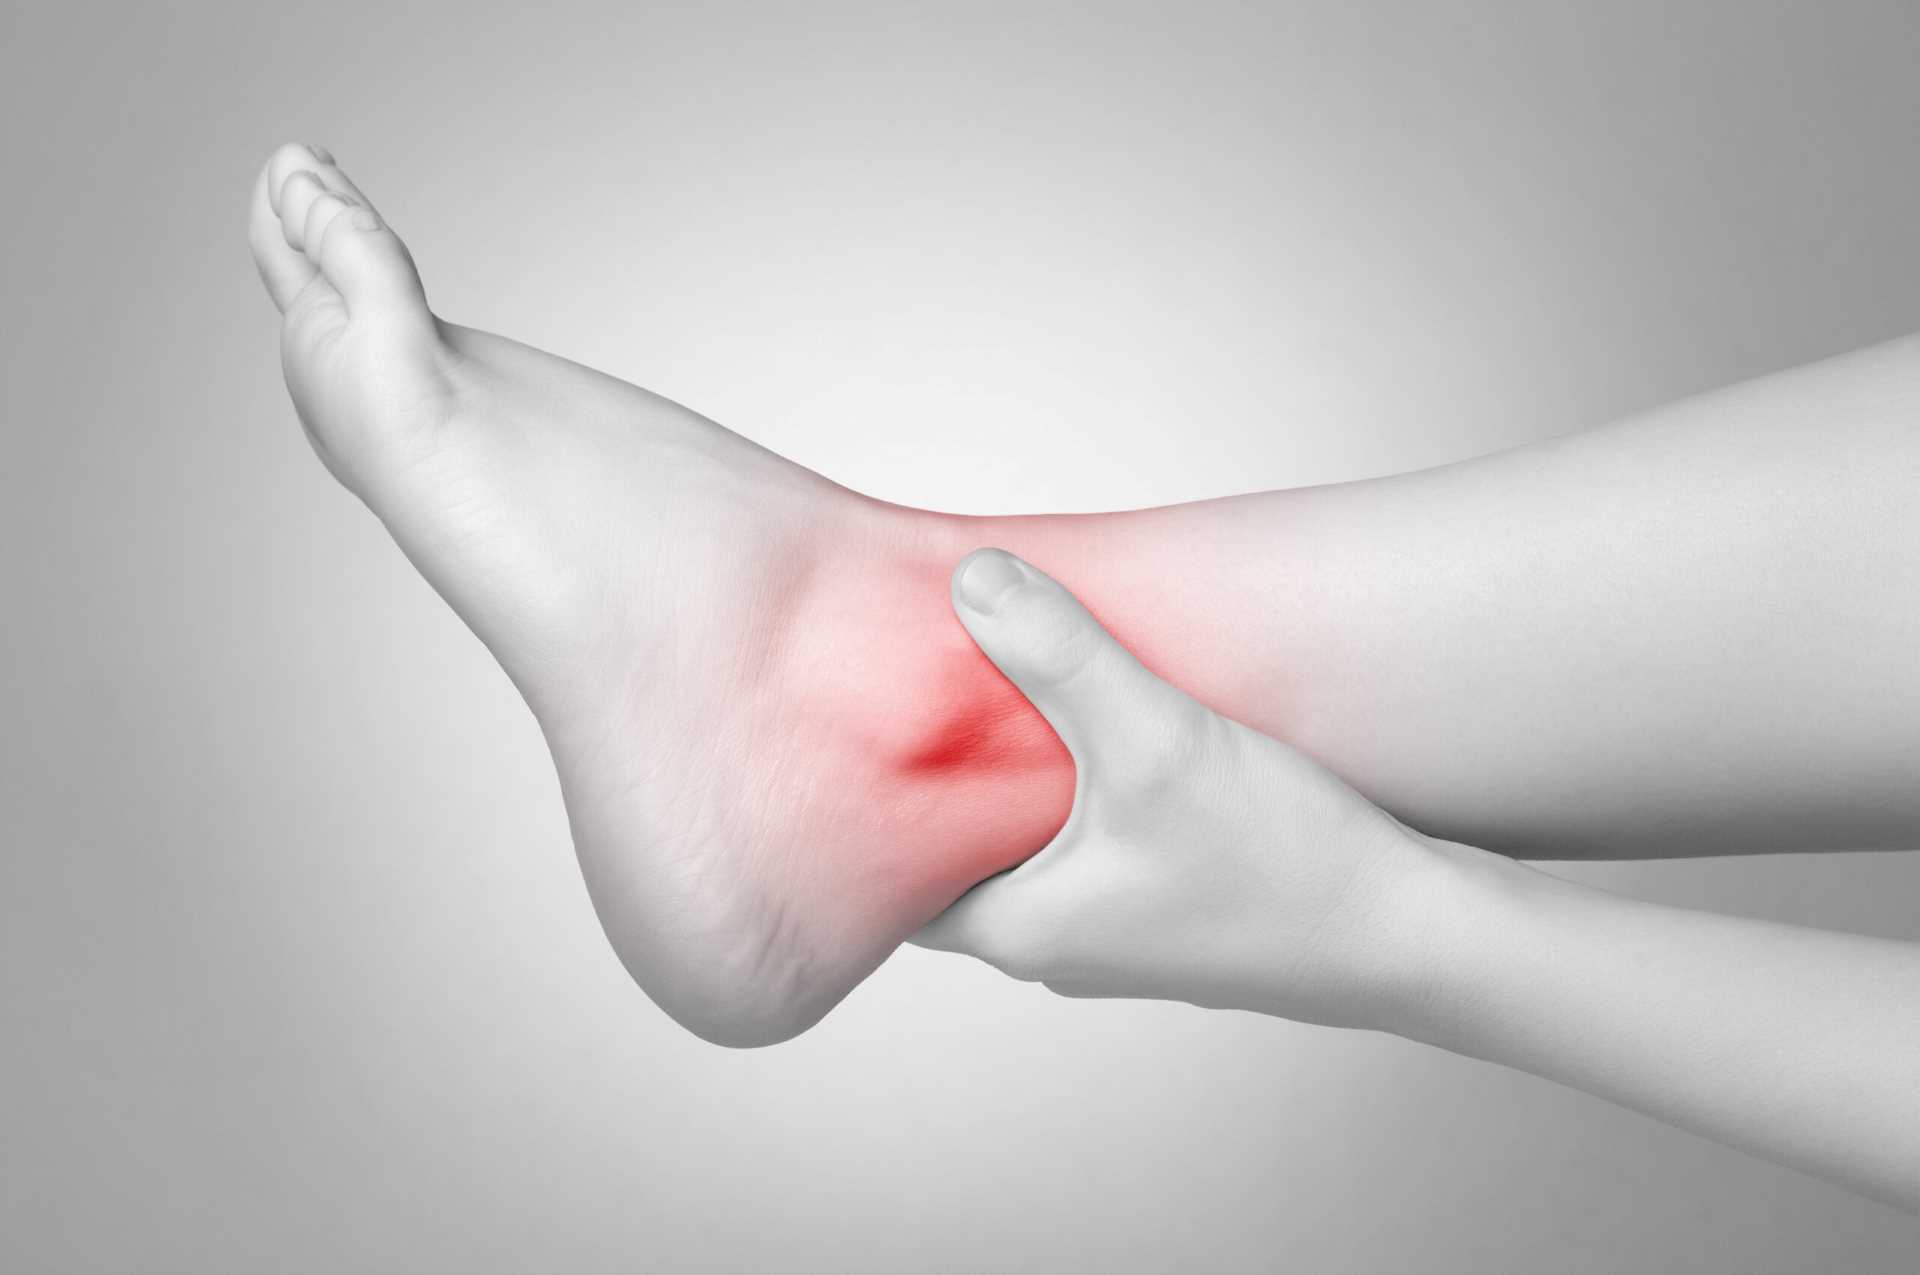 Heel Pain After Running: Causes, Treatment, Prevention